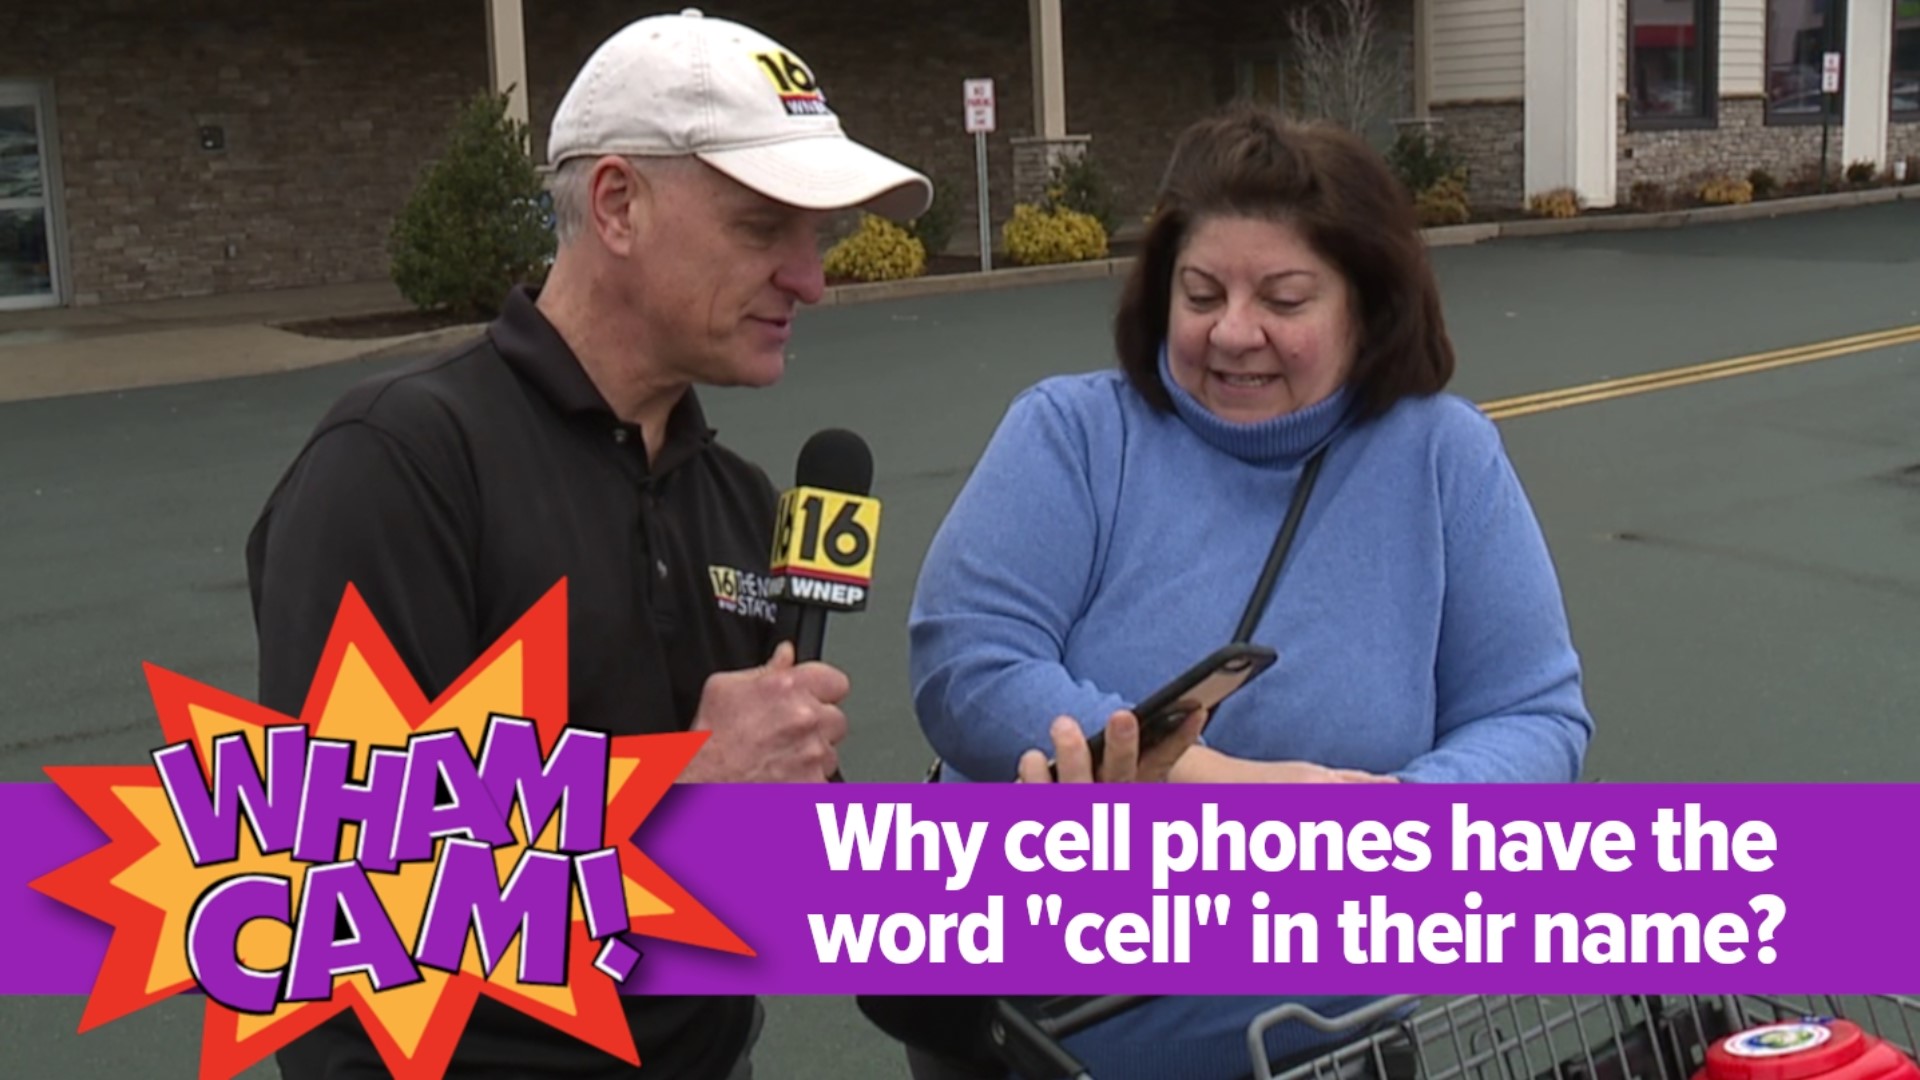 Ever wonder why cell phones have the word "cell" in their name? Joe headed to Moosic to see if anyone had the answer in this week's Wham Cam.